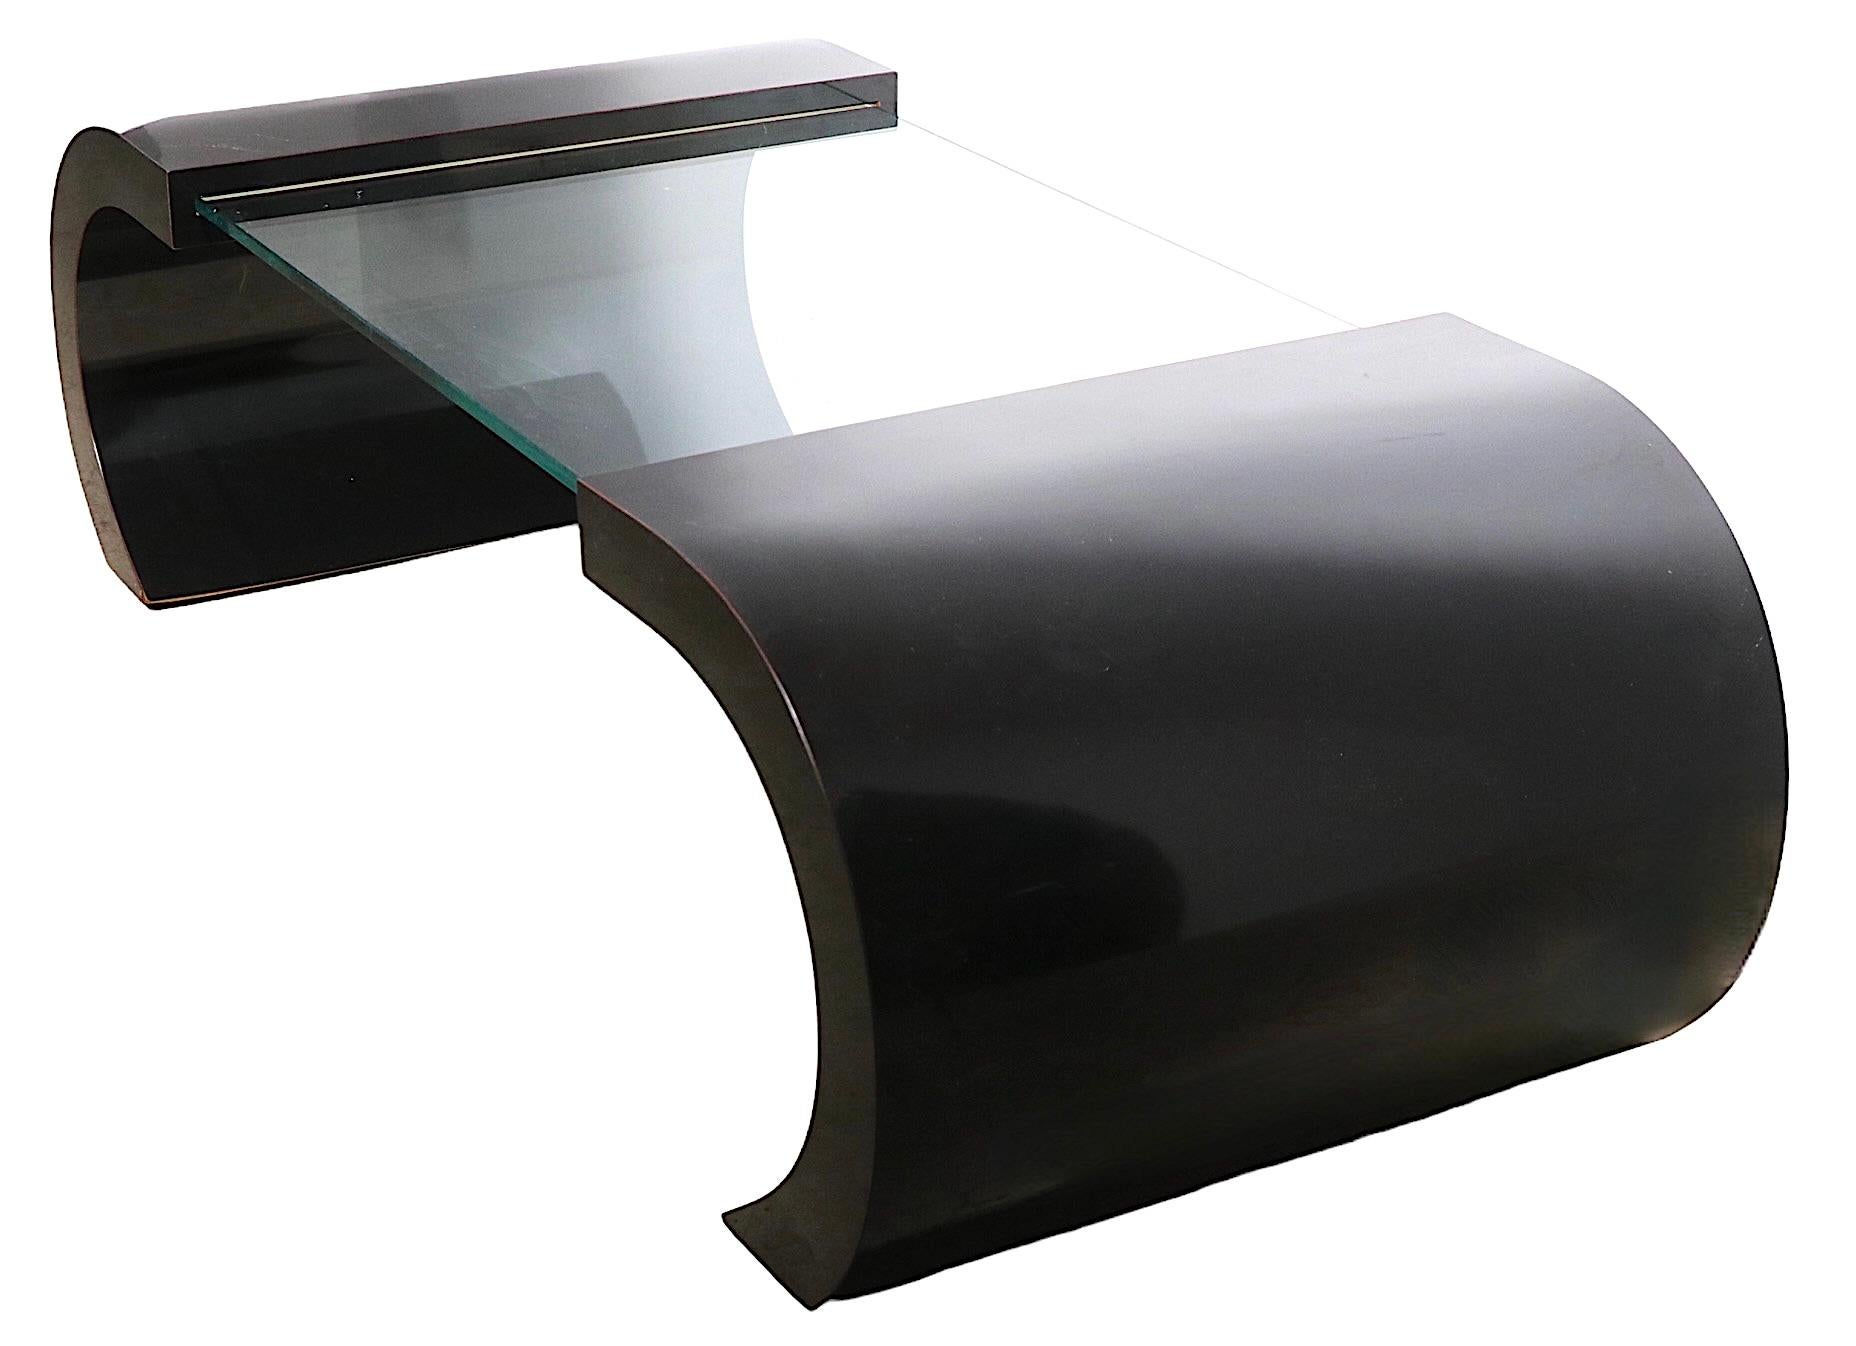 American Post Modern Formica and Glass Coffee Table After Panton, C 1970's For Sale